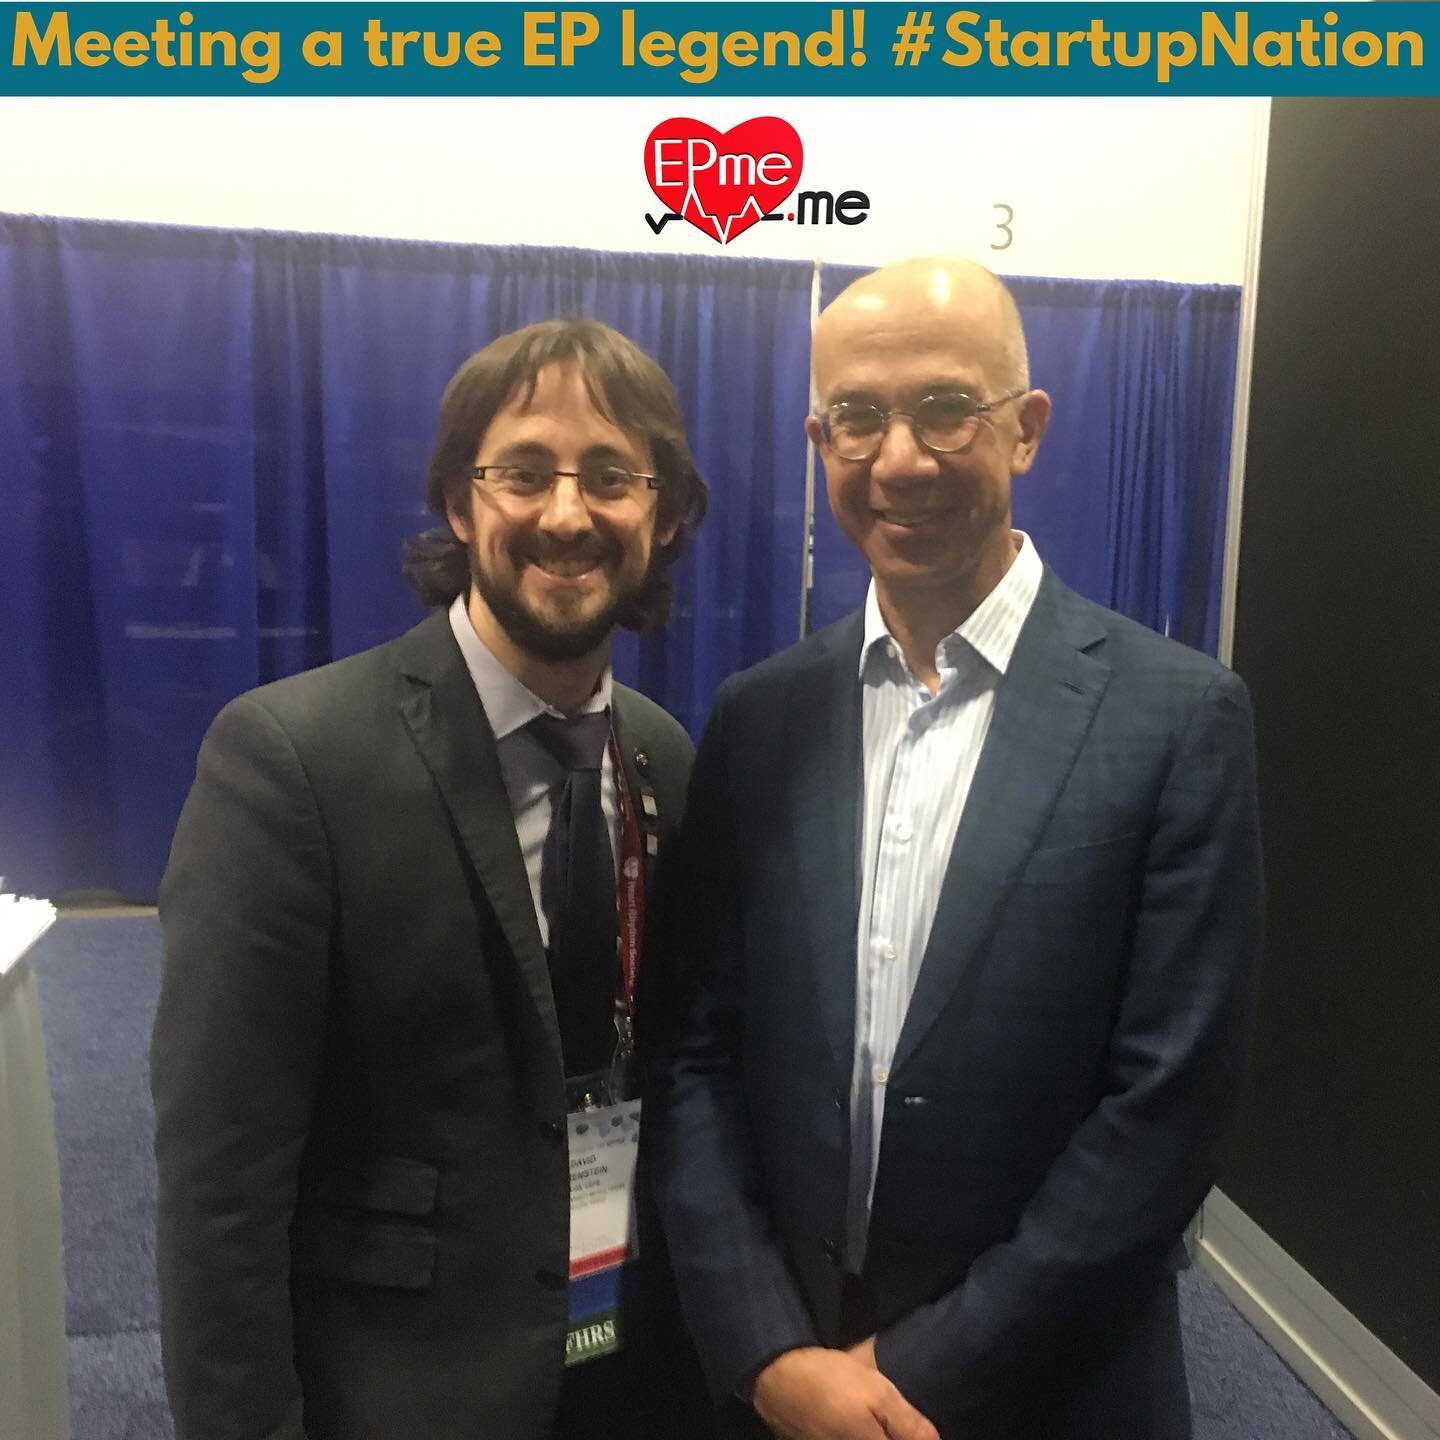 What a pleasure meeting a true legend Shlomo Ben Chaim founder and creator of the Carto system and EPD to name but a few...!
#PhilipsEPD #Carto #startupnation #HRS2019 #HRSap #electrophysiology #cardiology #ablation #medtronic #heartrhythm #epeeps